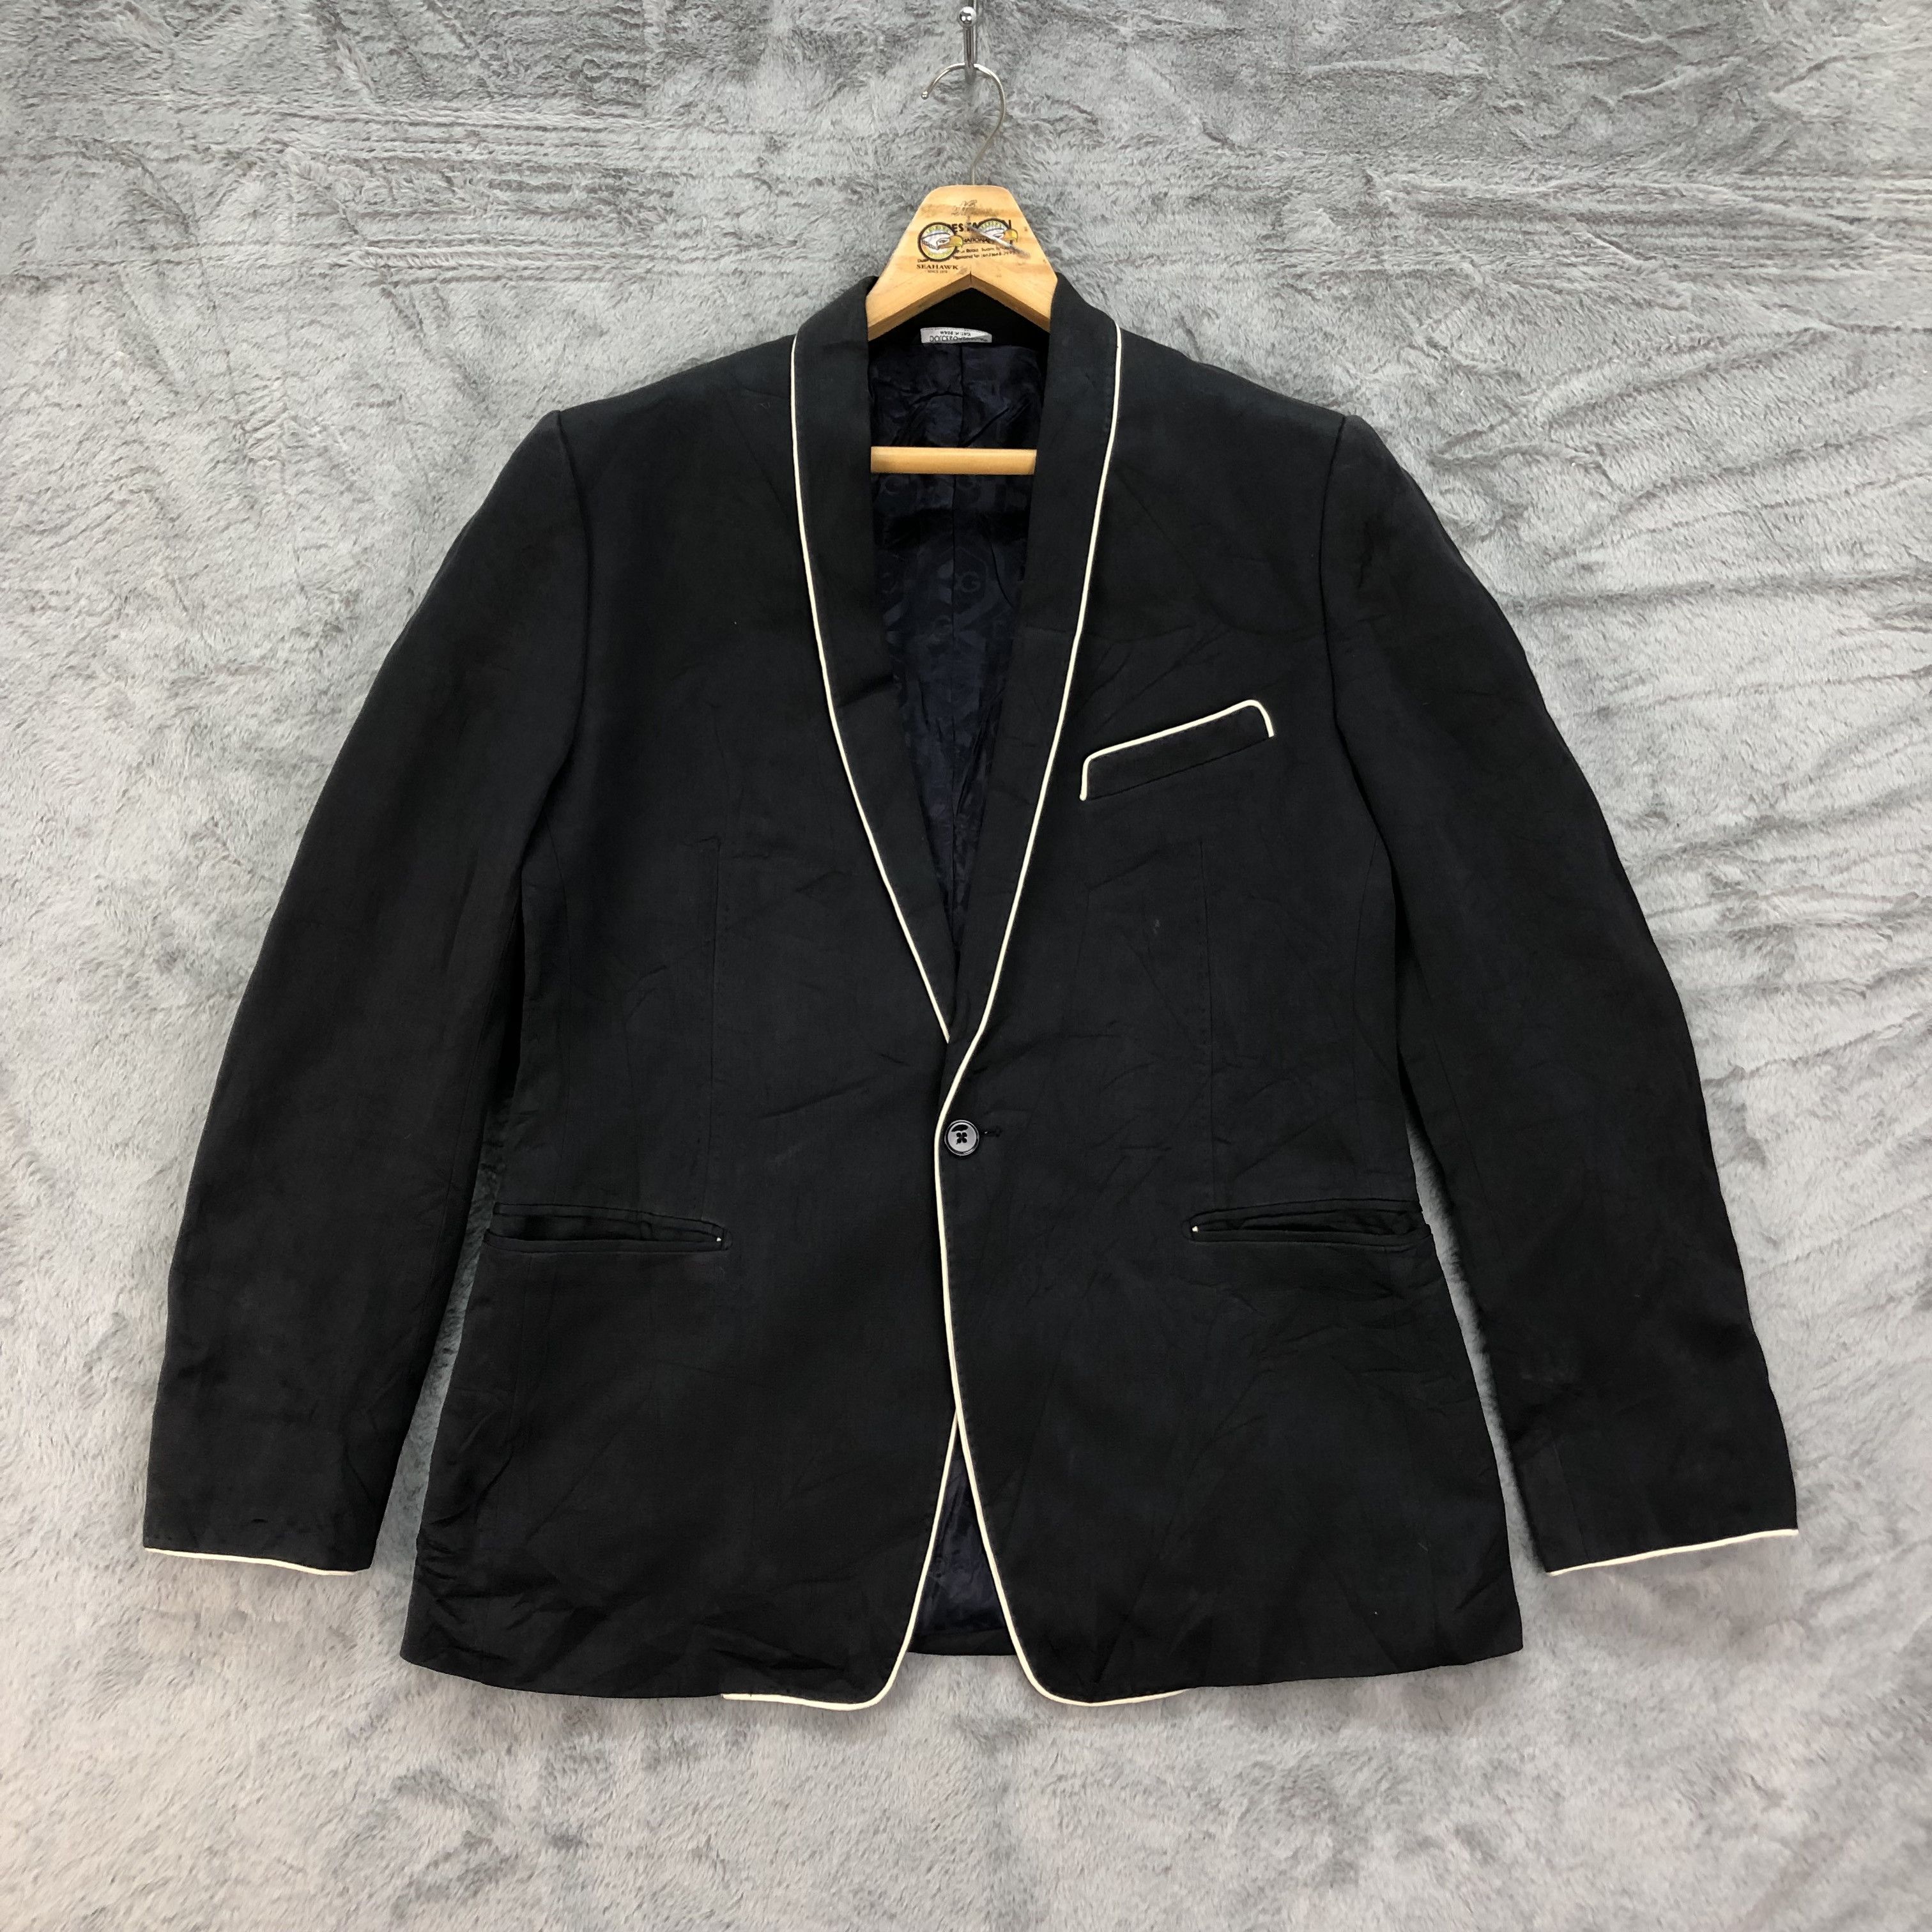 Dolce & Gabbana Made in Italy Suits Jacket #4565-159 - 1